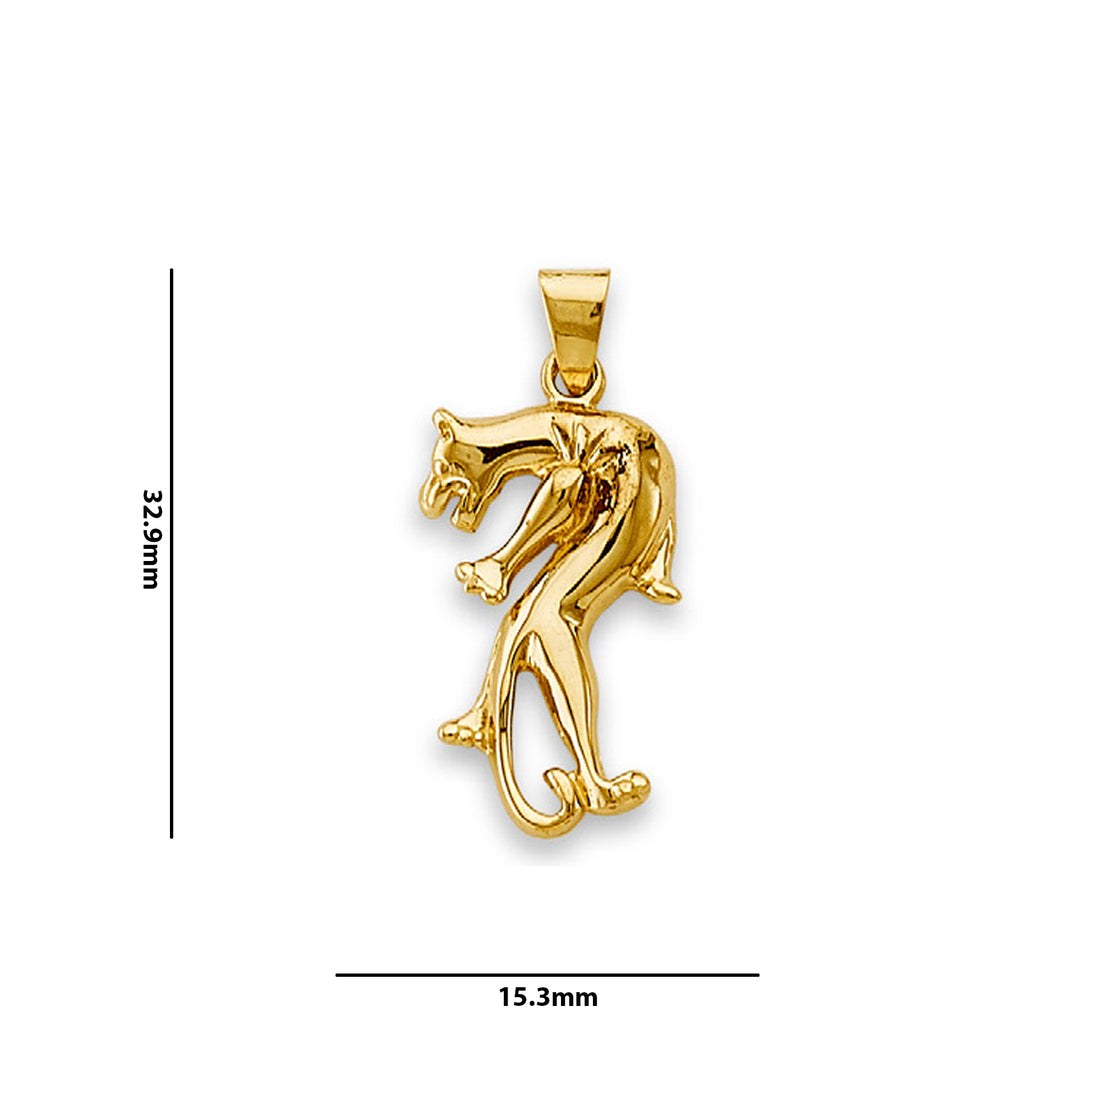 Yellow Gold Aesthetic Panther Charm Pendant with Measurement